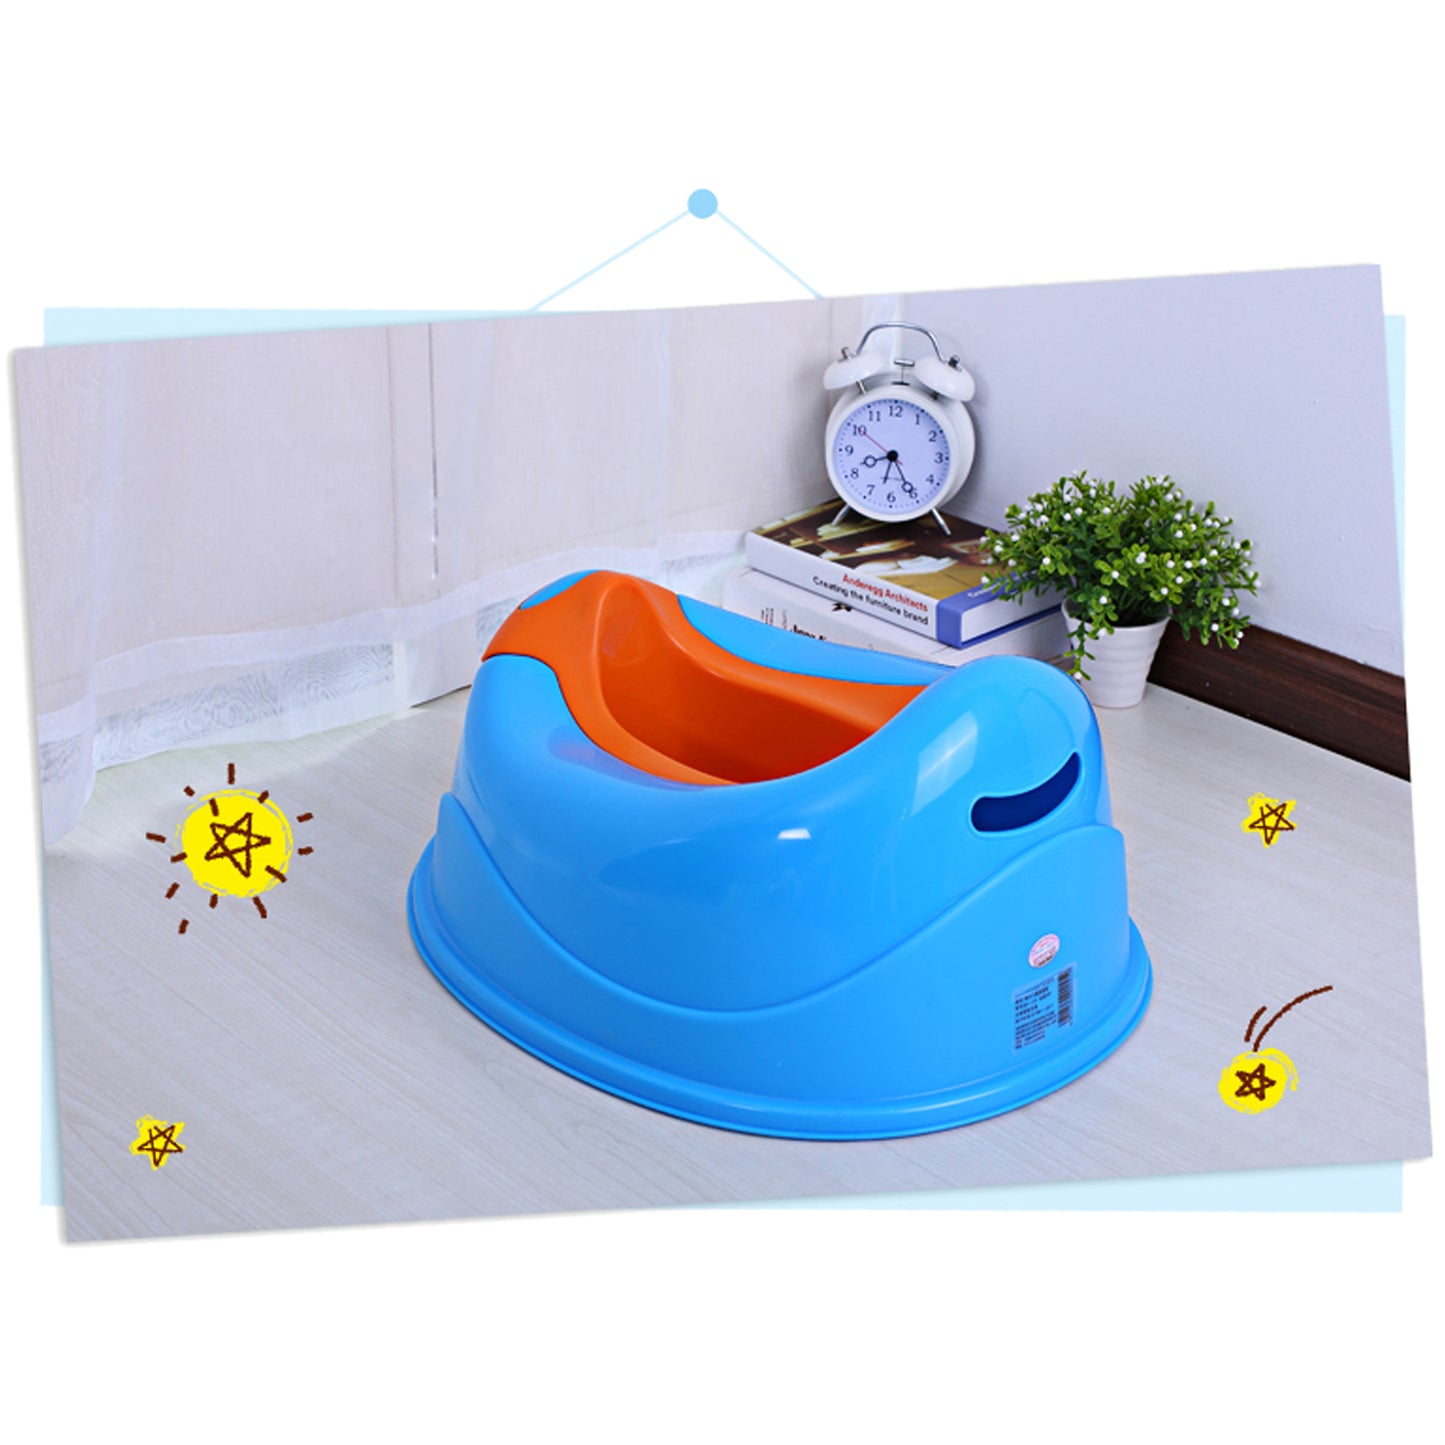 Potty Trainer(Without Packing)